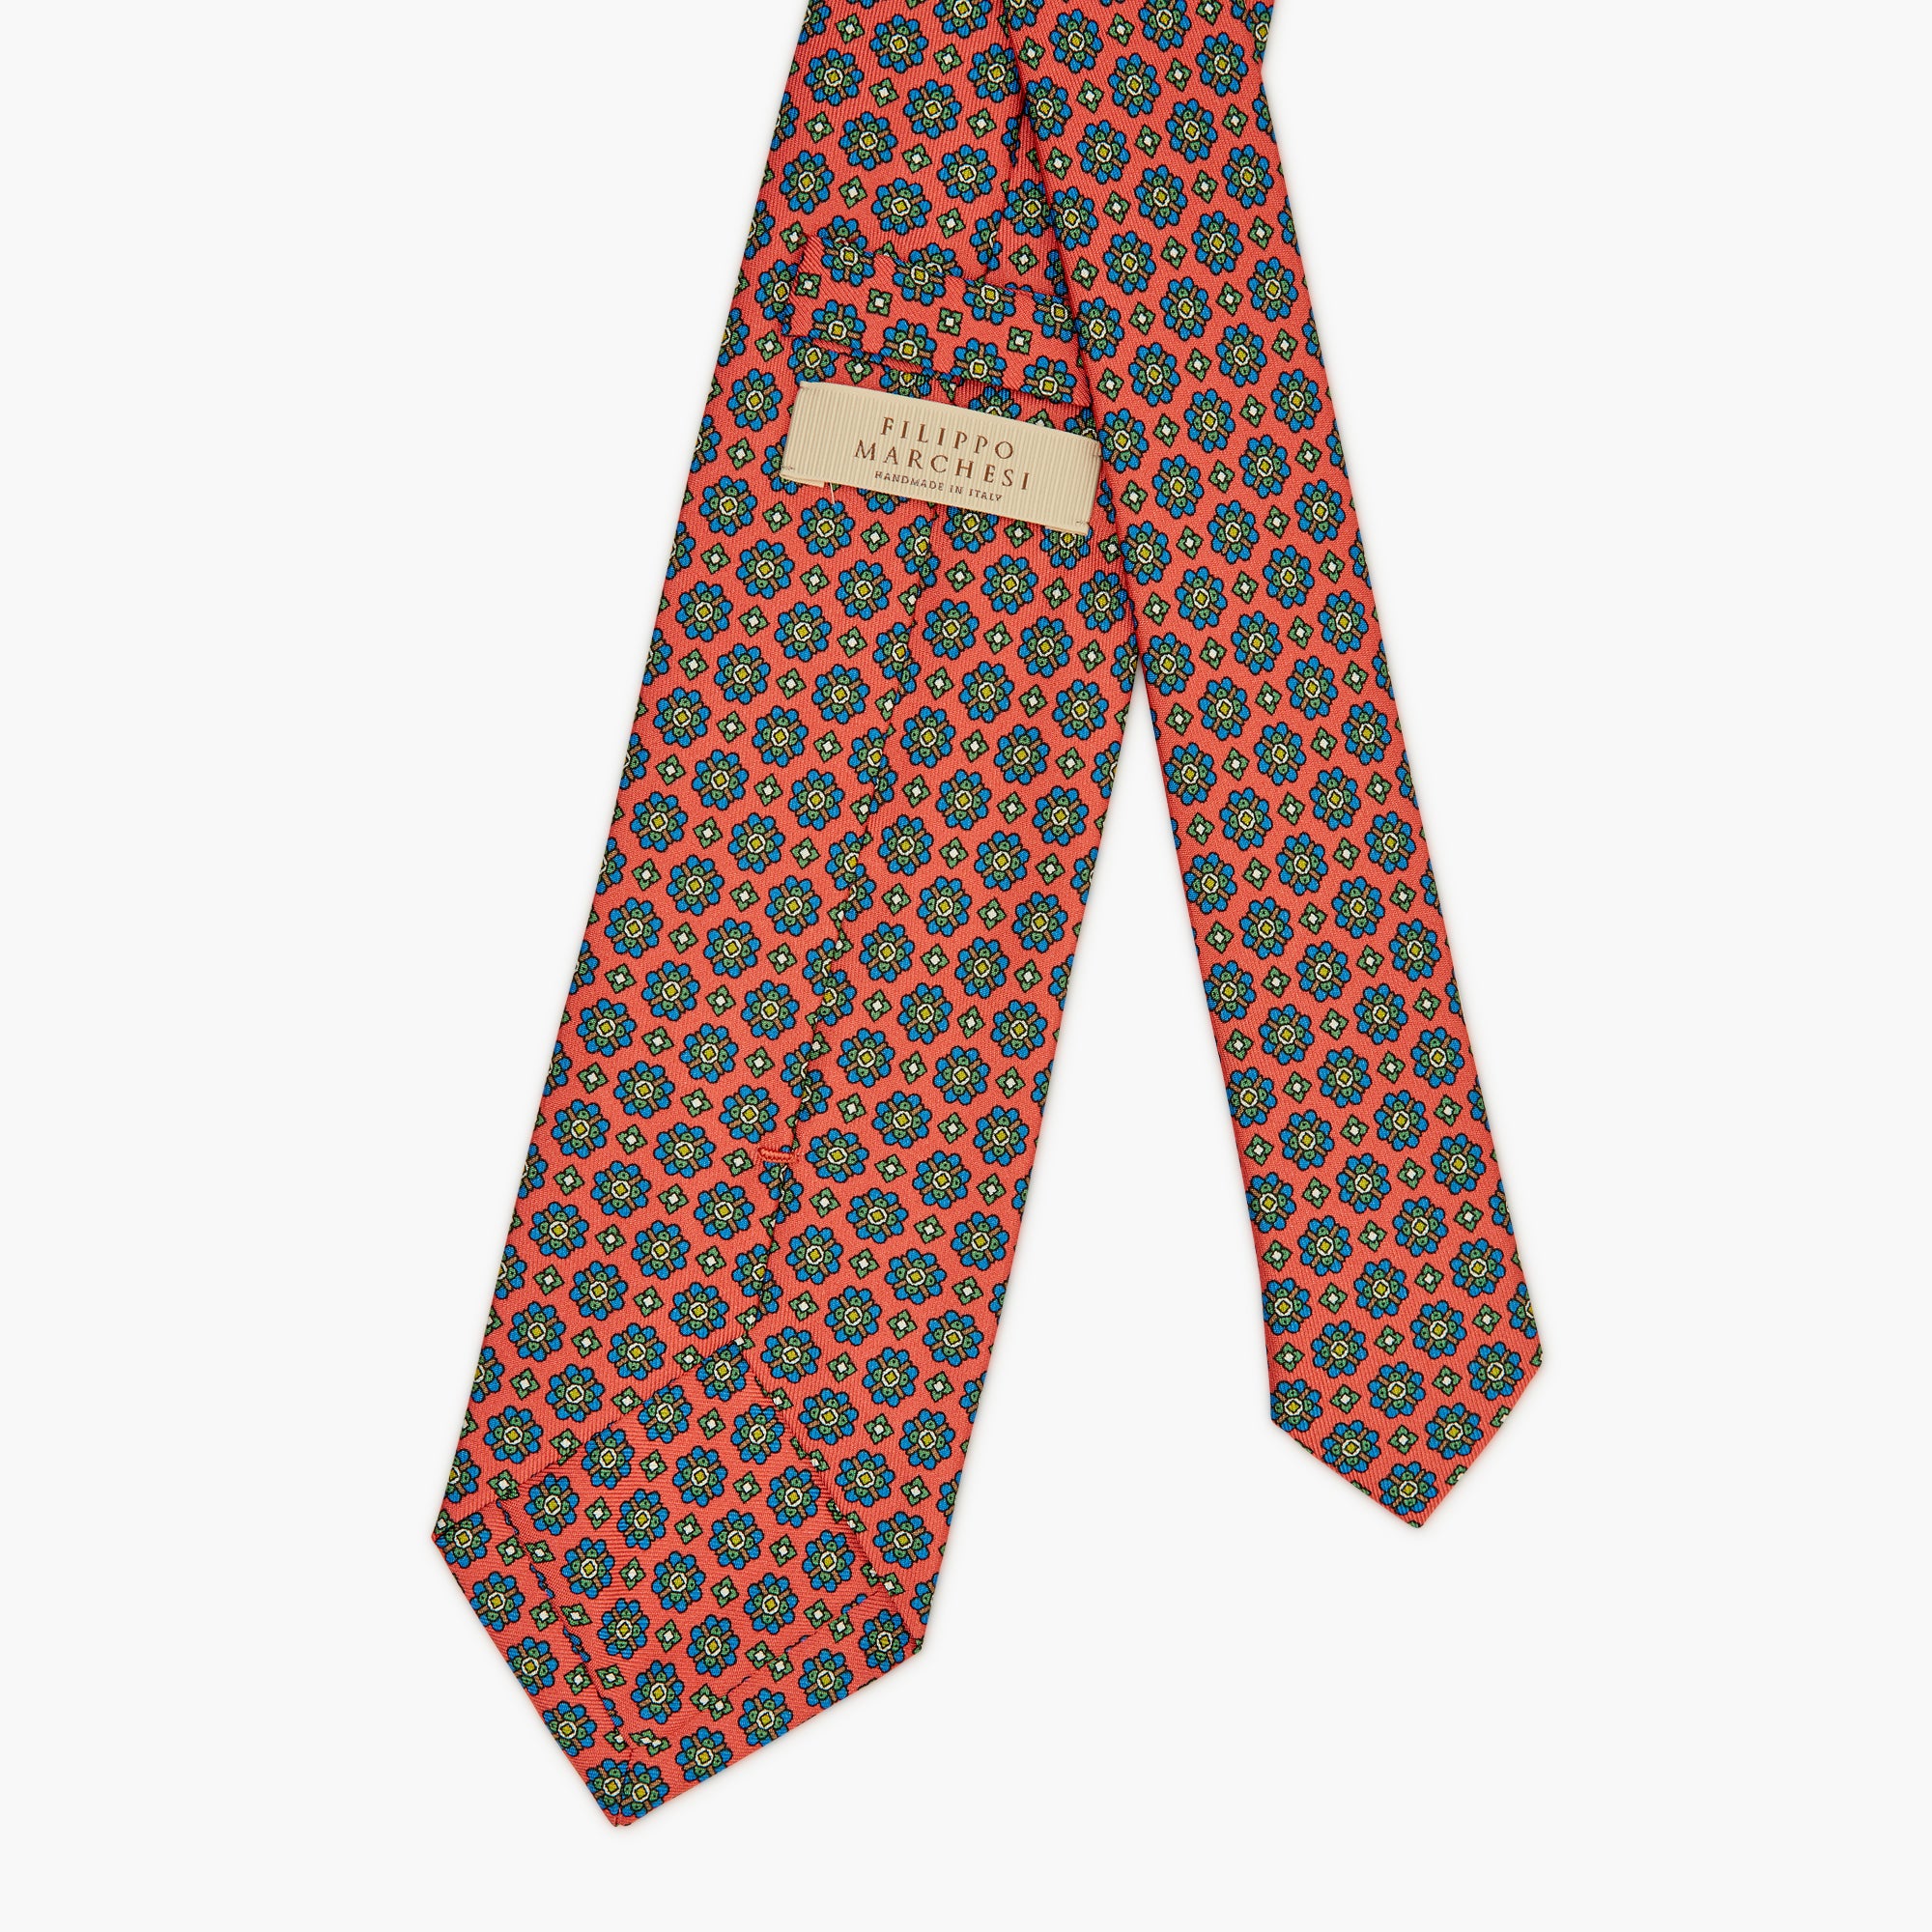 3-Fold Floral Printed Italian Silk Tie - Coral Red